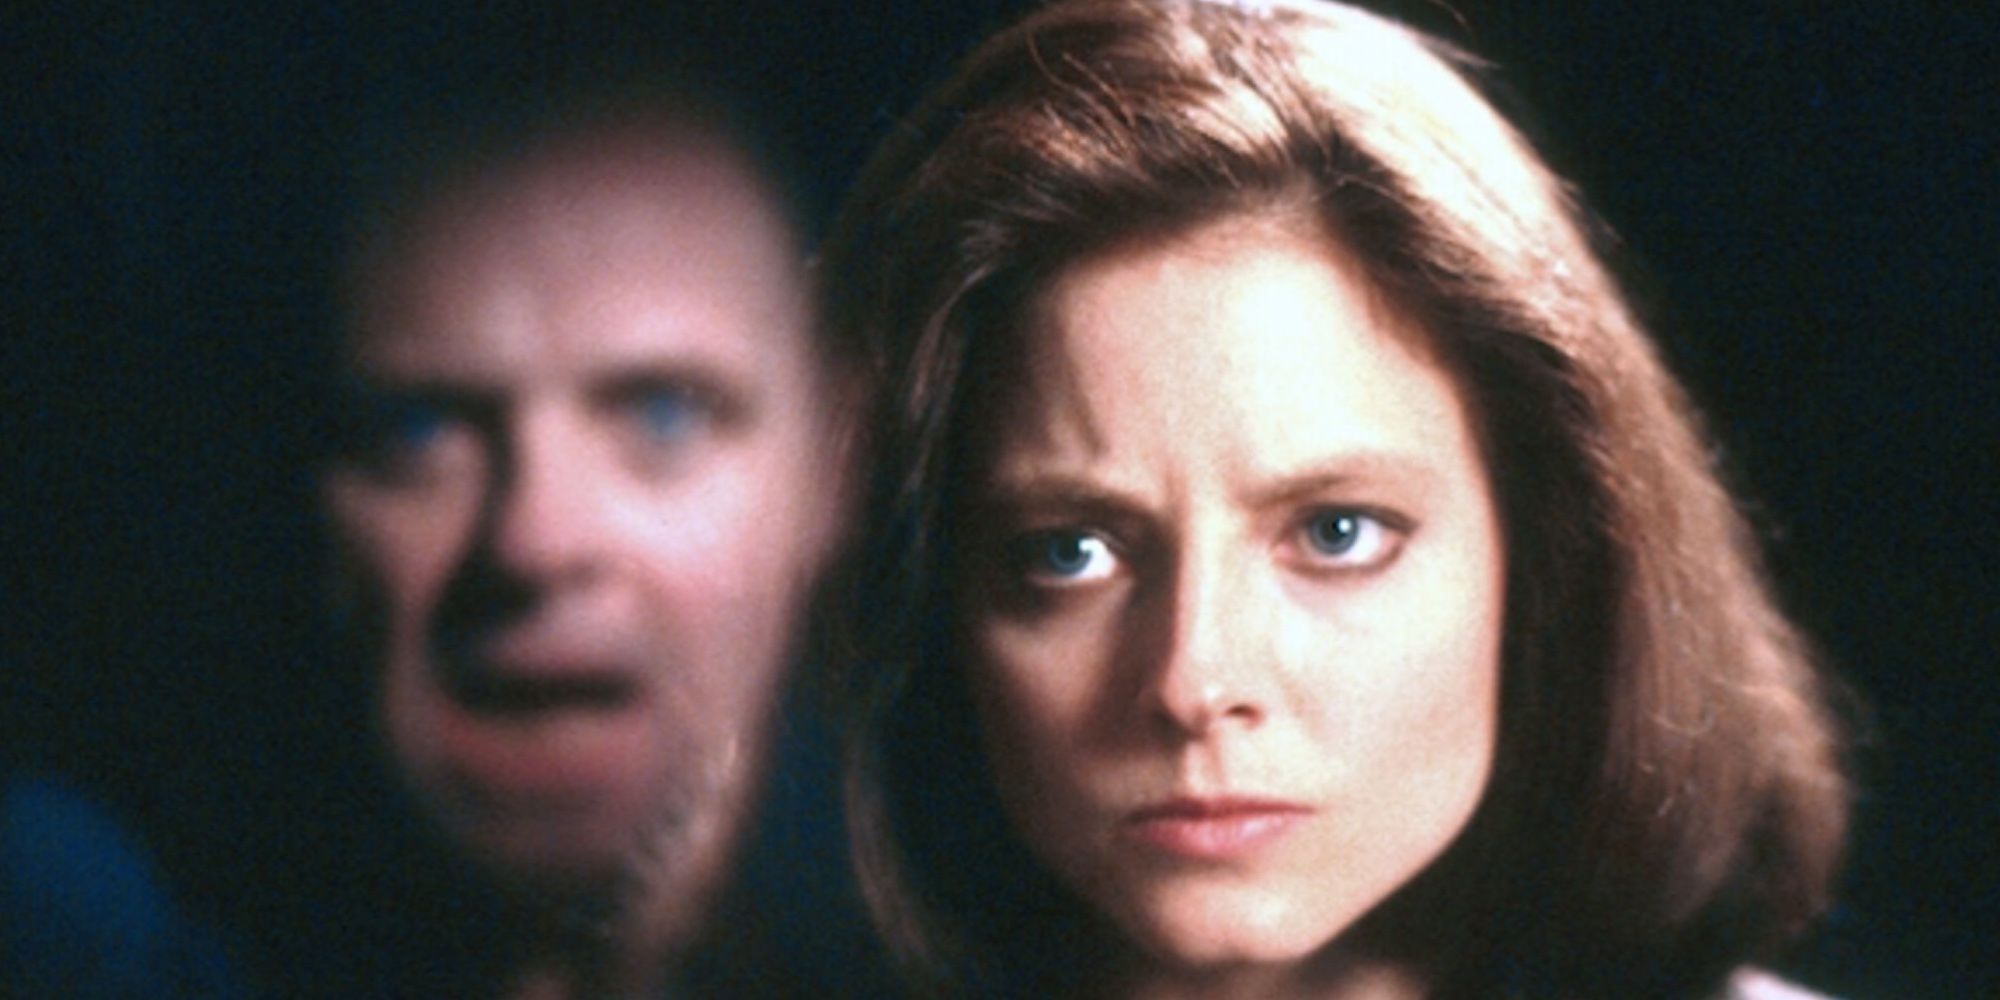 Hannibal Lecter's face reflects on the glass as he talk to Clarice in The Silence of the Lambs.